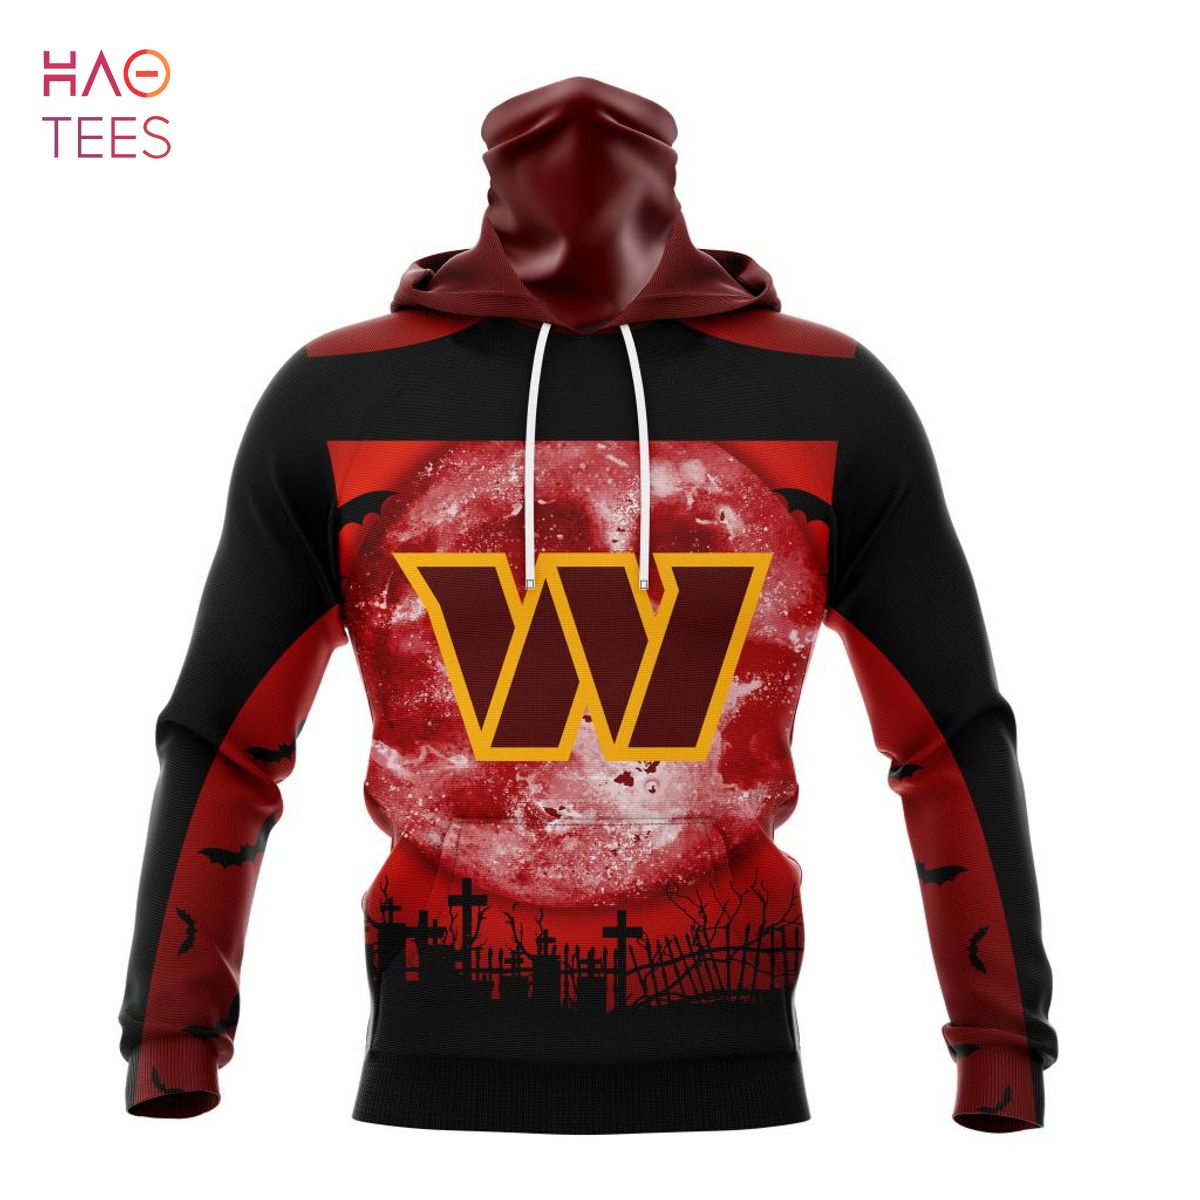 BEST NFL Washington Football Team, Specialized Halloween Concepts Kits 3D Hoodie